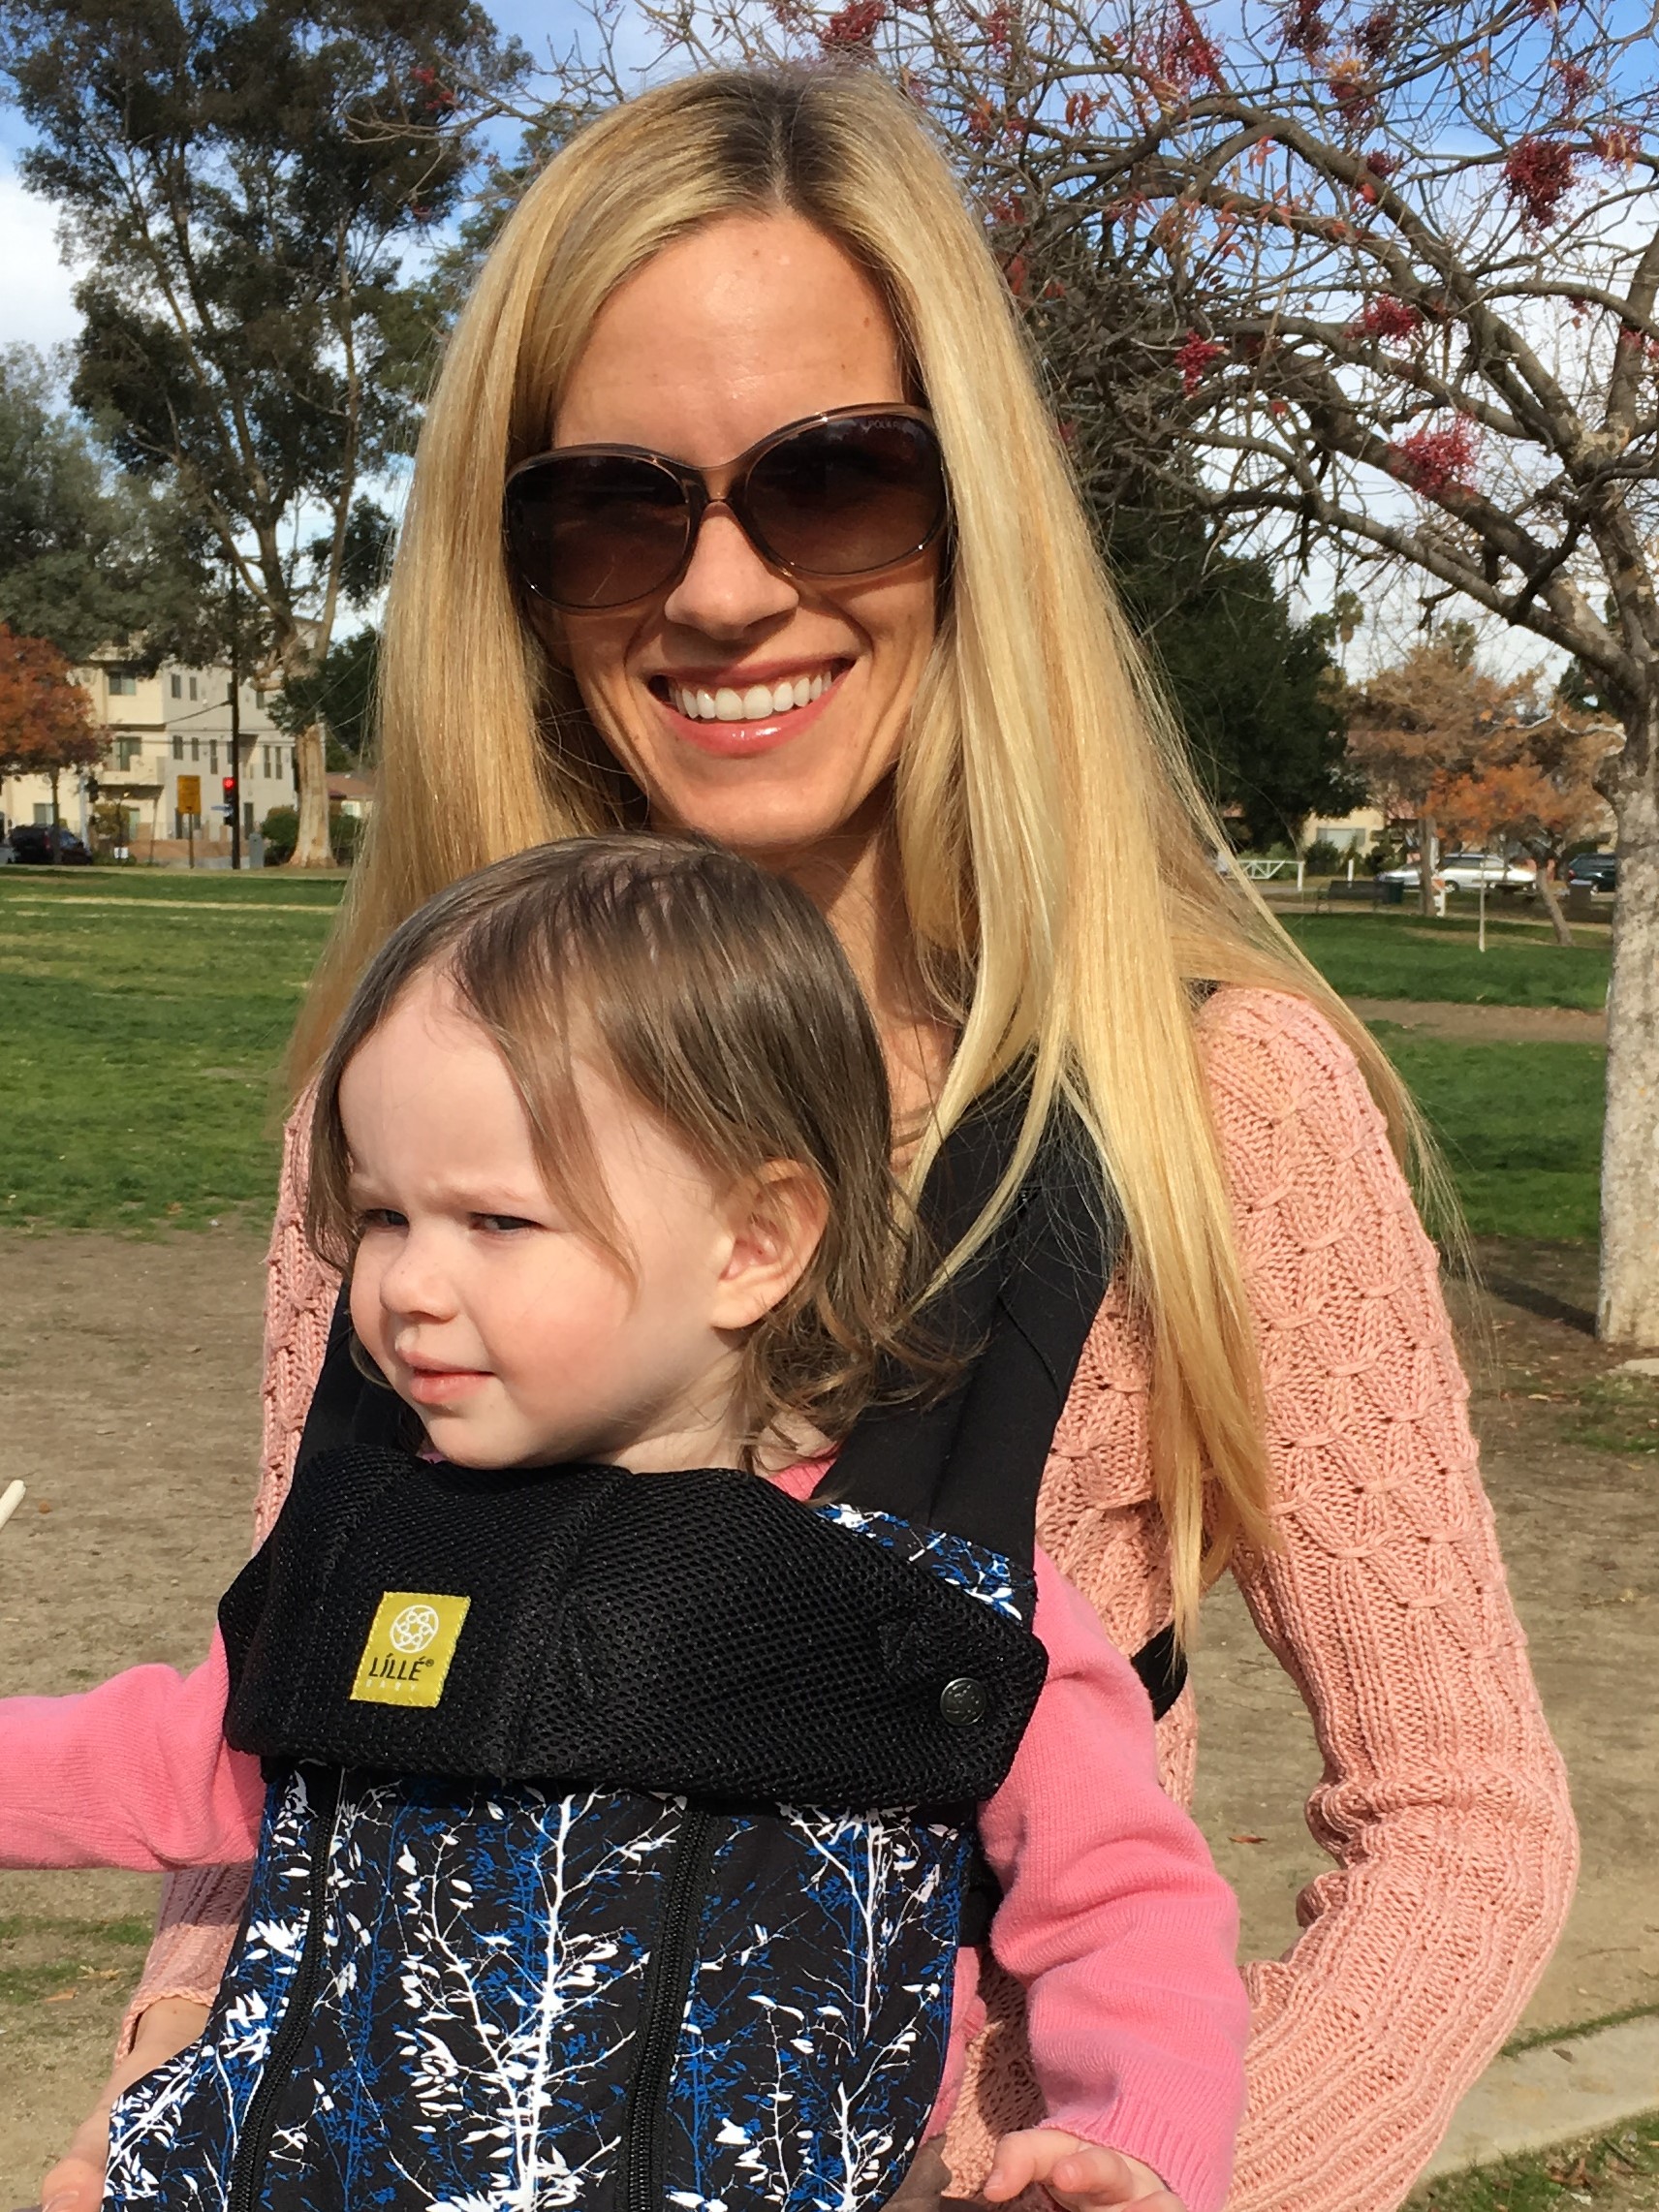 Lillebaby Baby Carrier